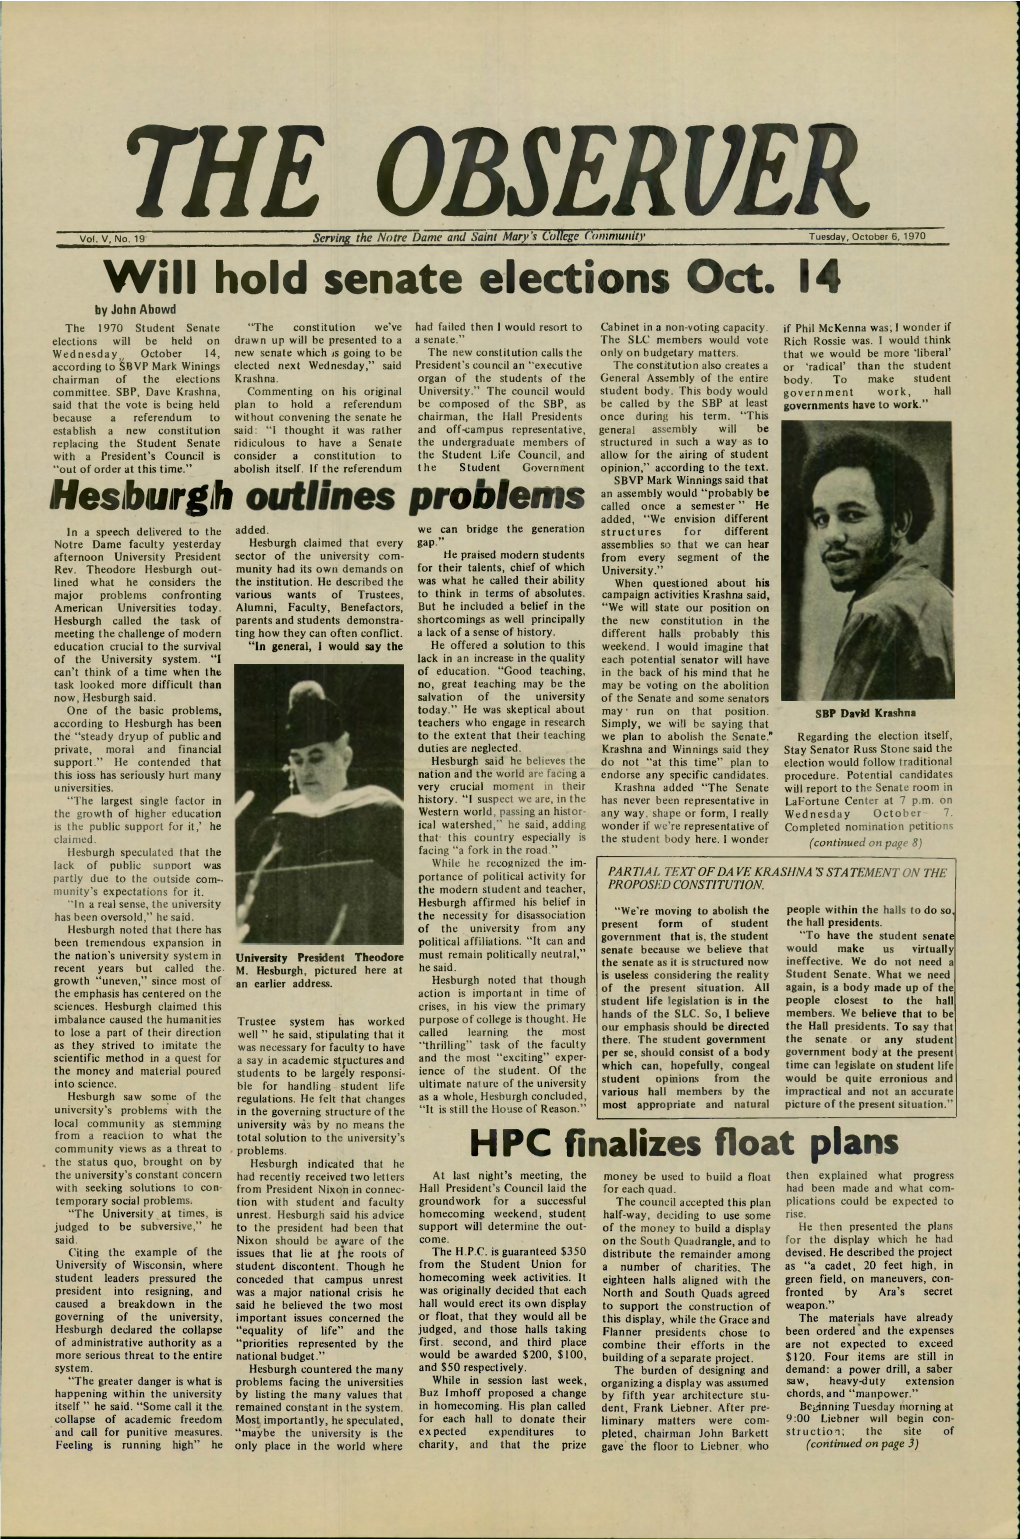 Will Hold Senate Elections Oct. 14 by John Abowd the 1970 Student Senate “The Constitution We’Ve Had Failed Then 1 Would Resort to Cabinet in a Non-Voting Capacity